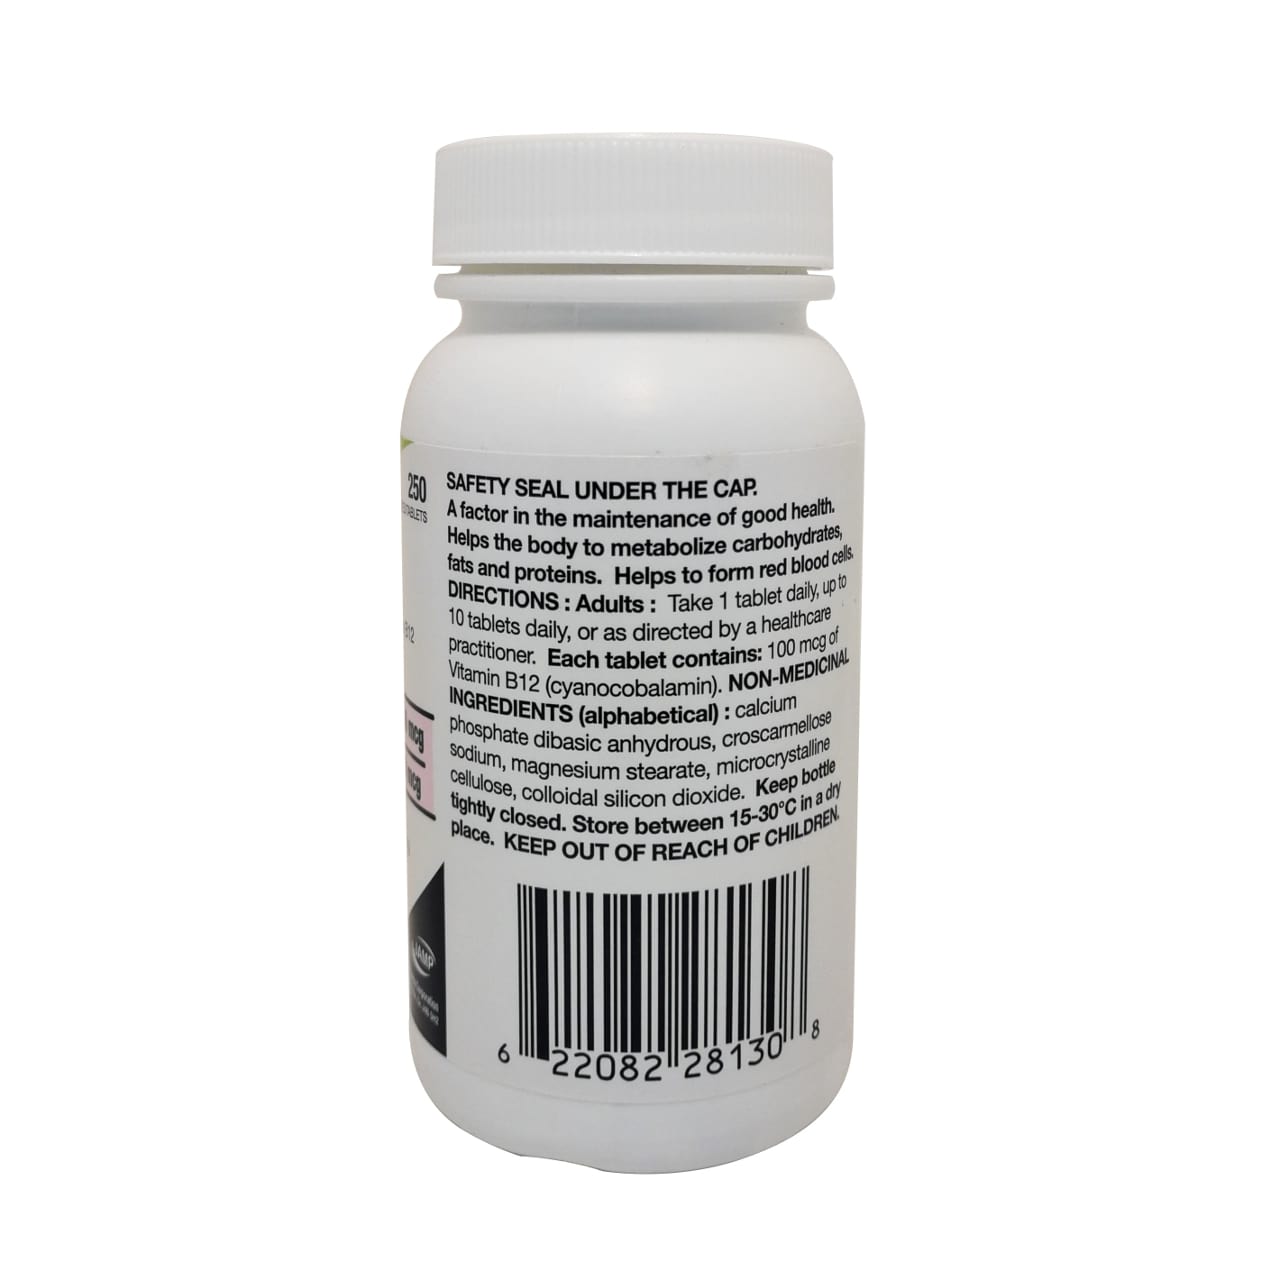 Product details, direections, and ingredients for JAMP Vitamin B12 100mcg in English